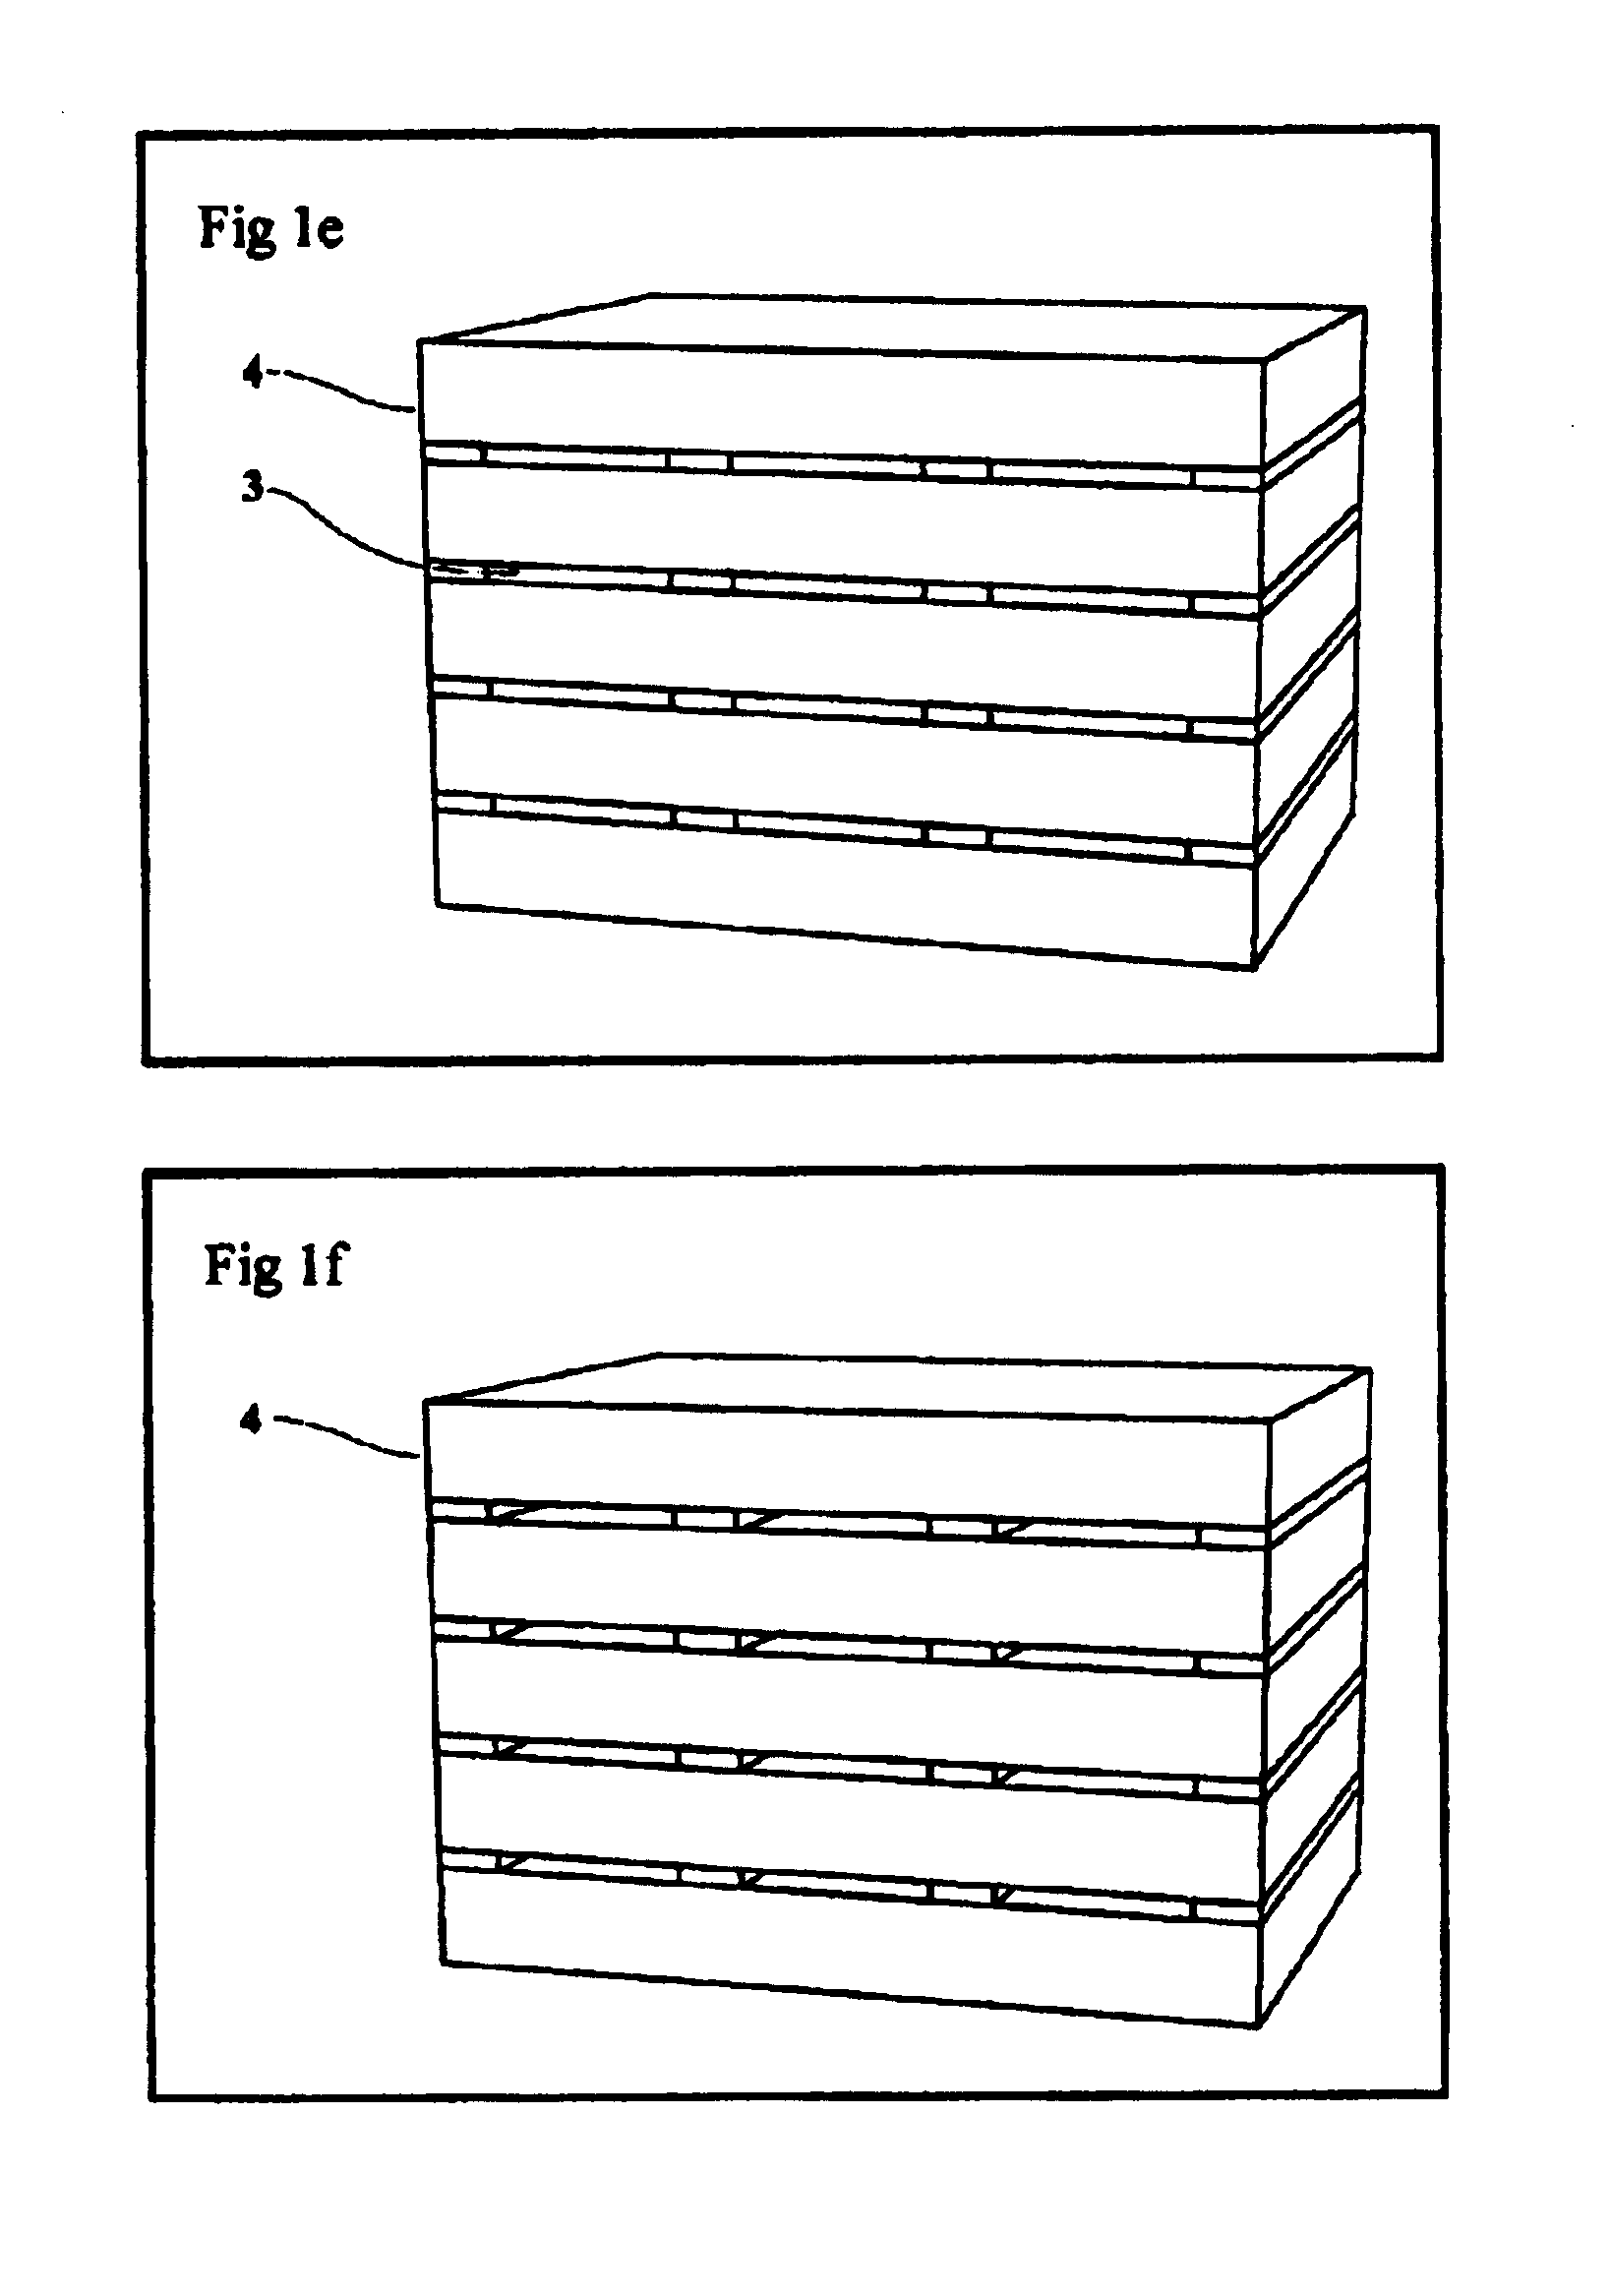 Thermotunnel converter with spacers between the electrodes